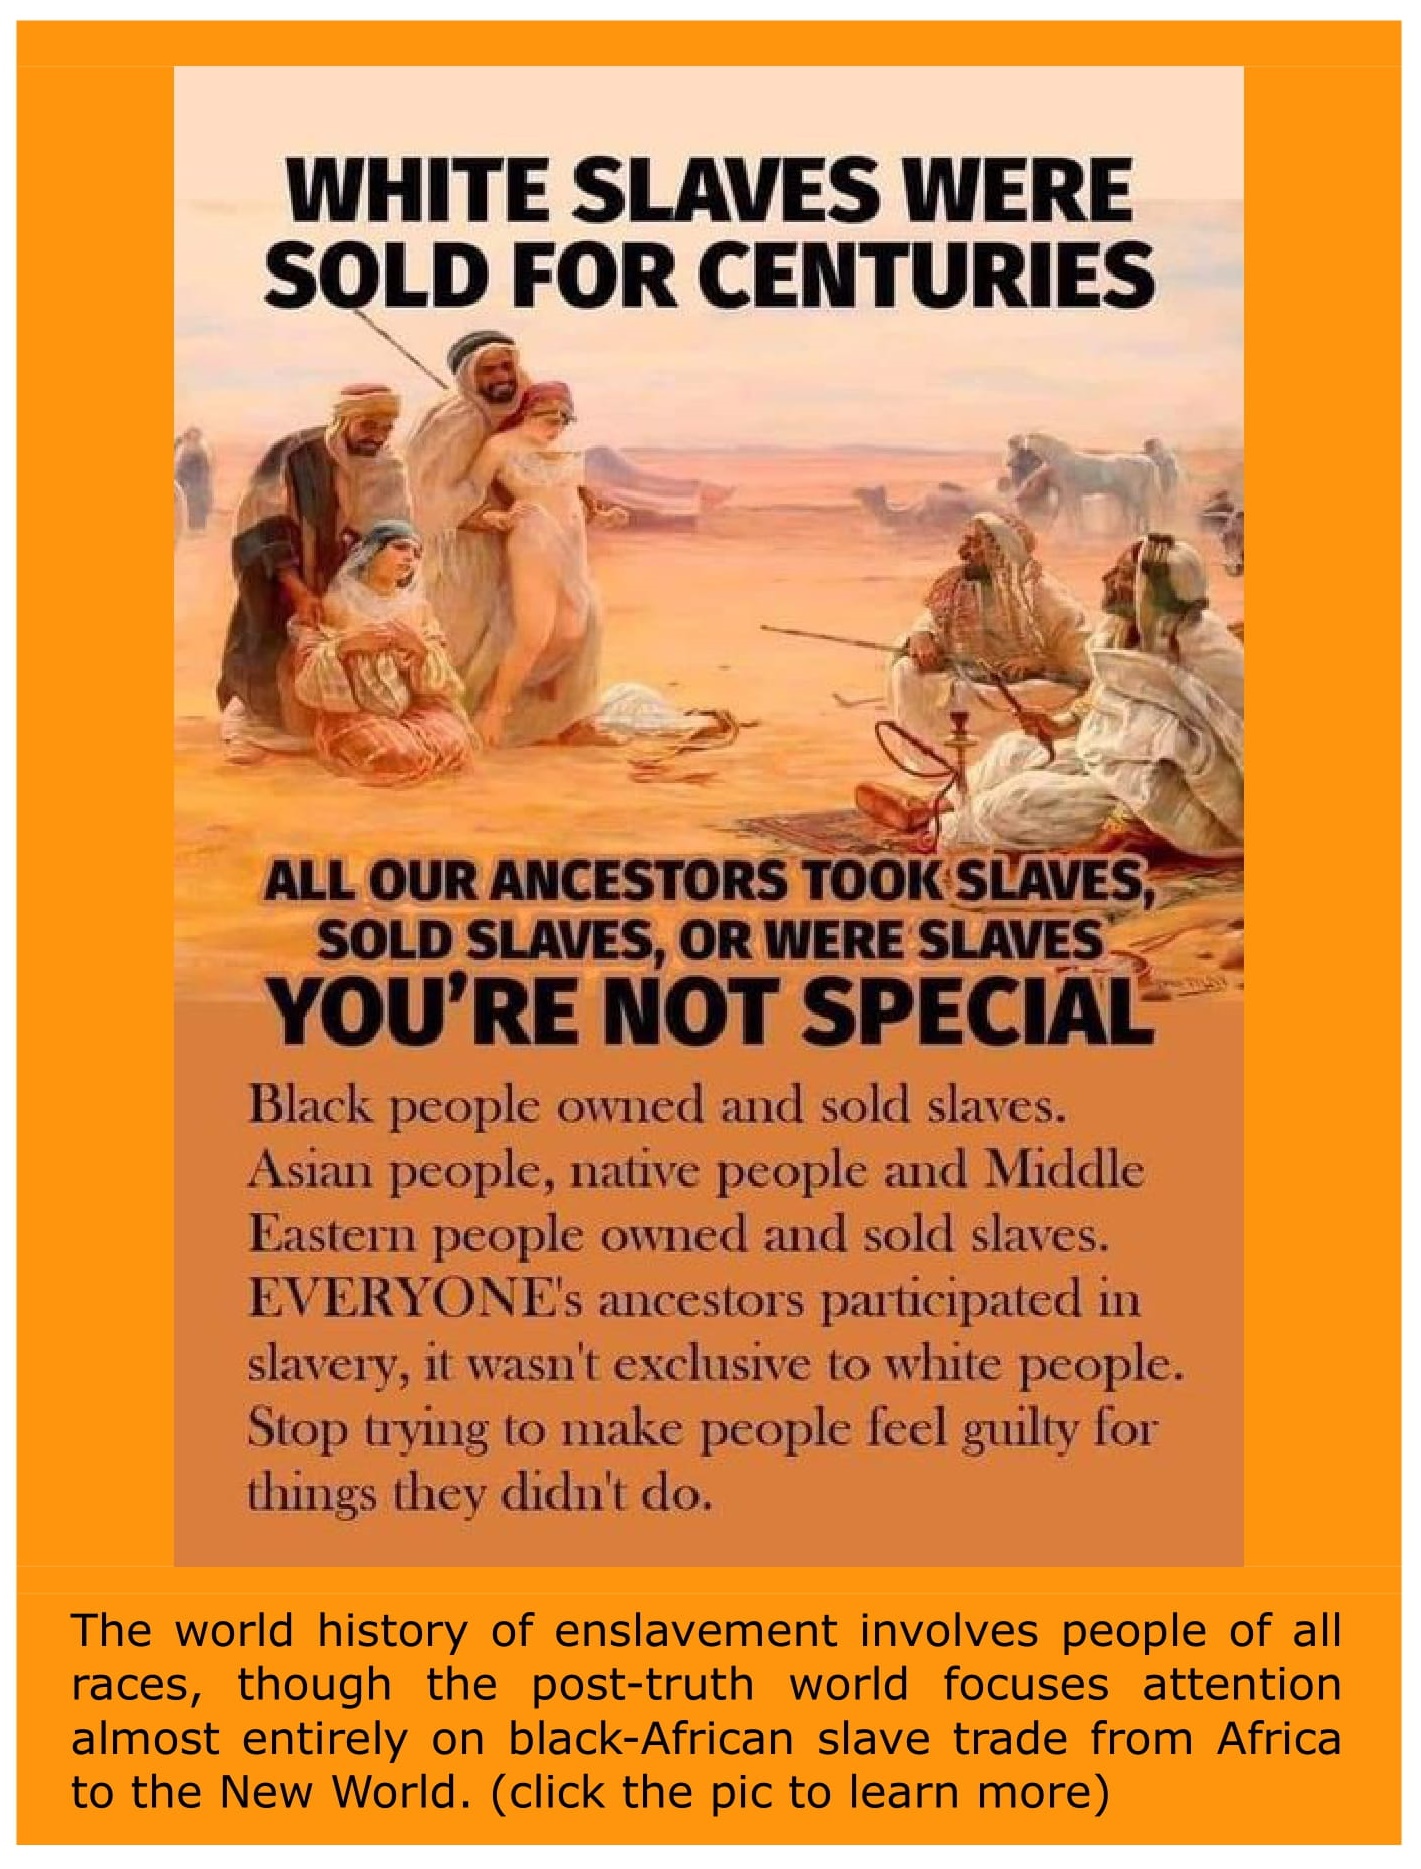 White Slaves were Sold for Centuries